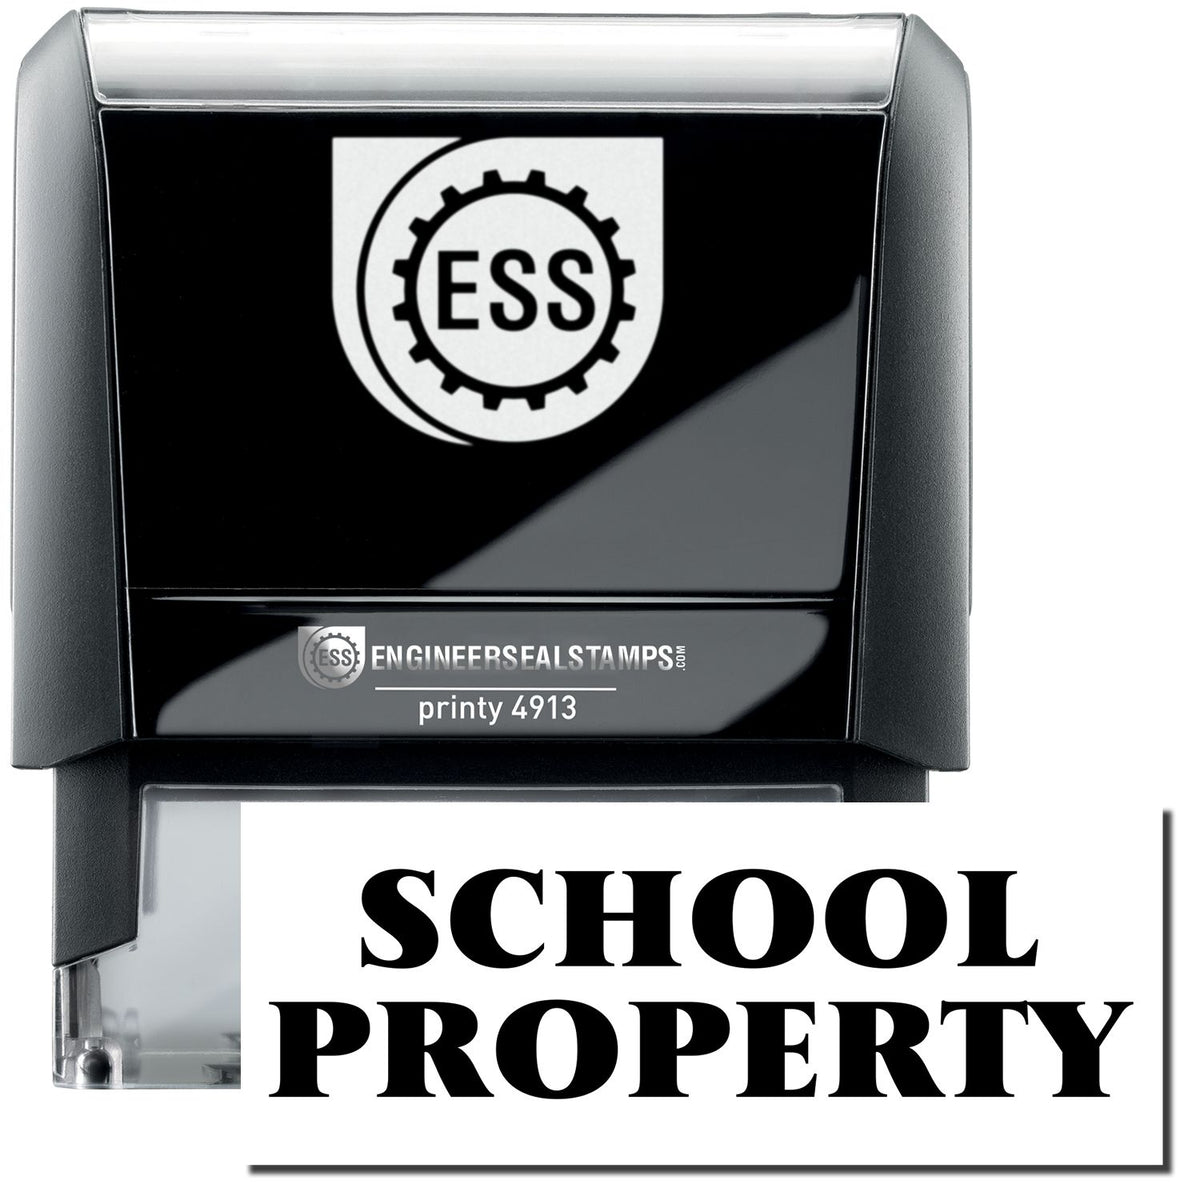 A self-inking stamp with a stamped image showing how the text &quot;SCHOOL PROPERTY&quot; in a large bold font is displayed by it.